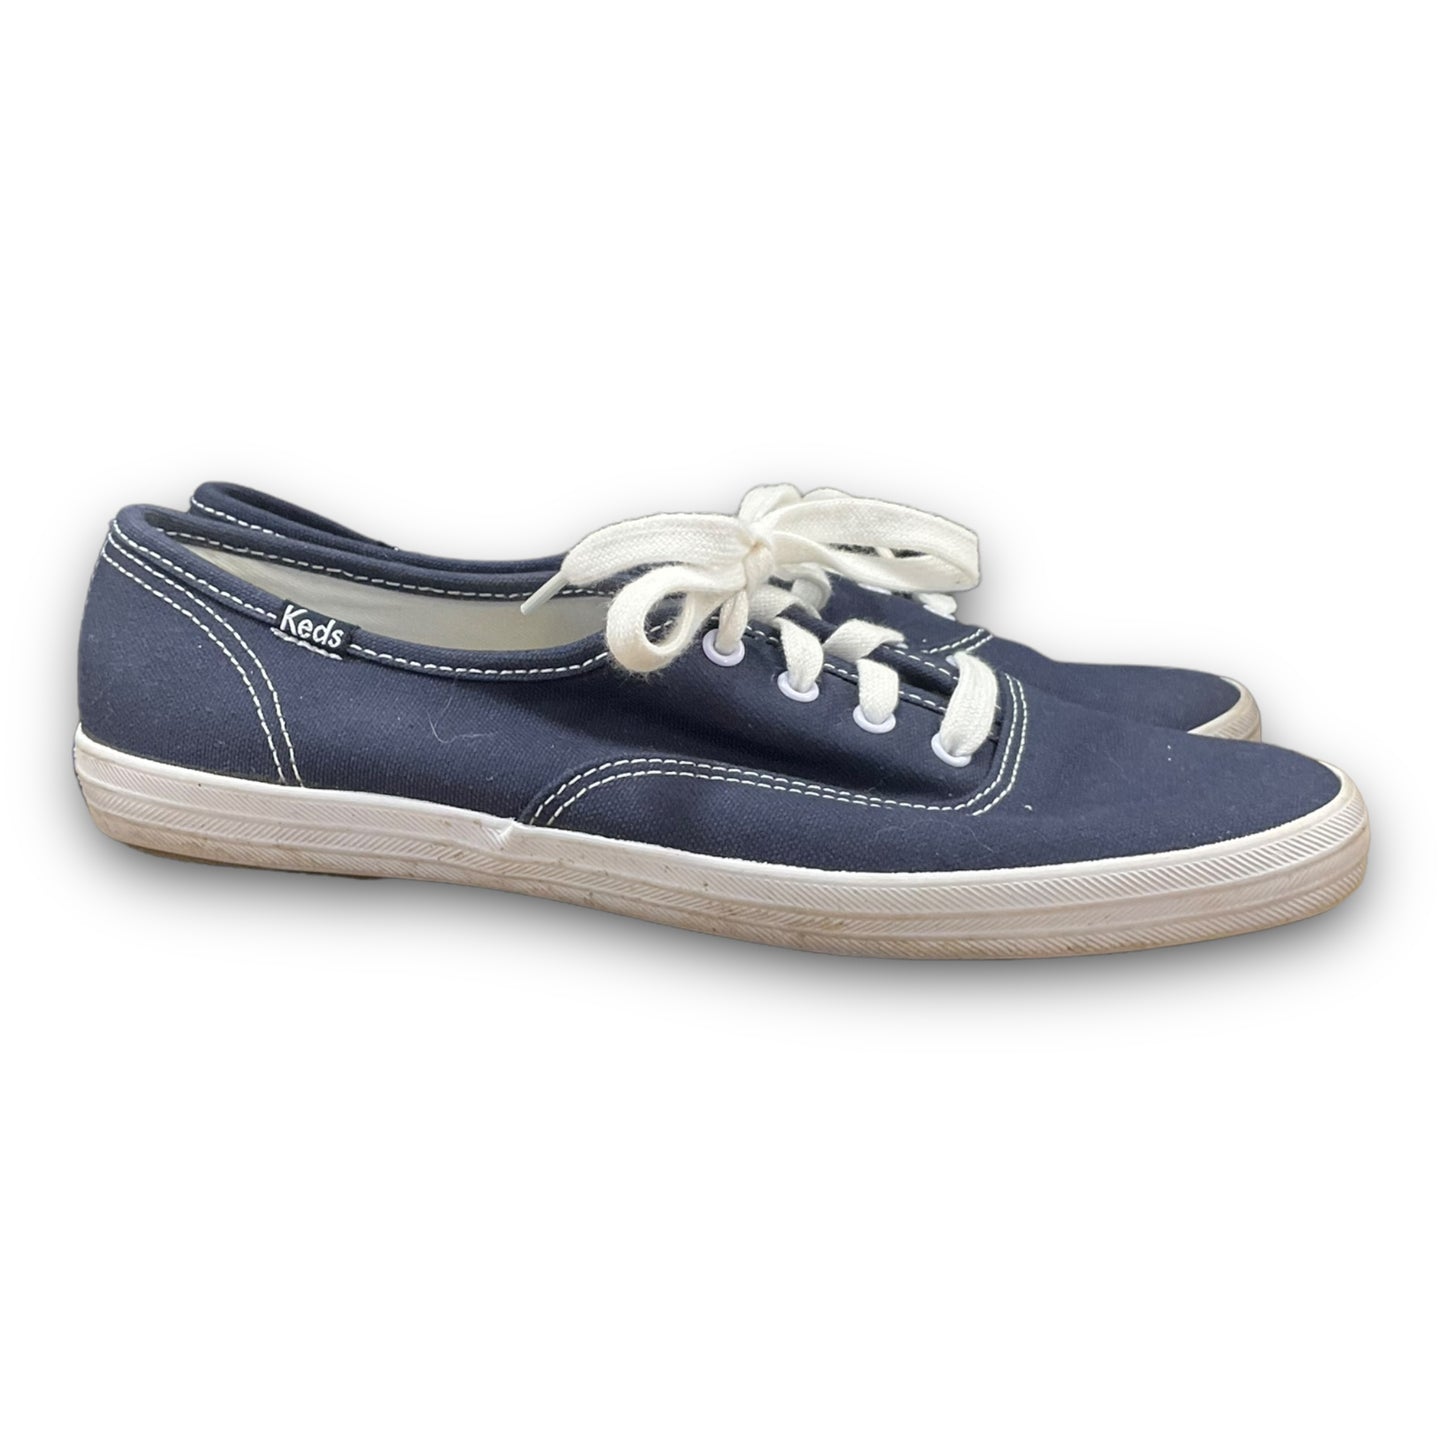 Shoes Sneakers By Keds  Size: 8